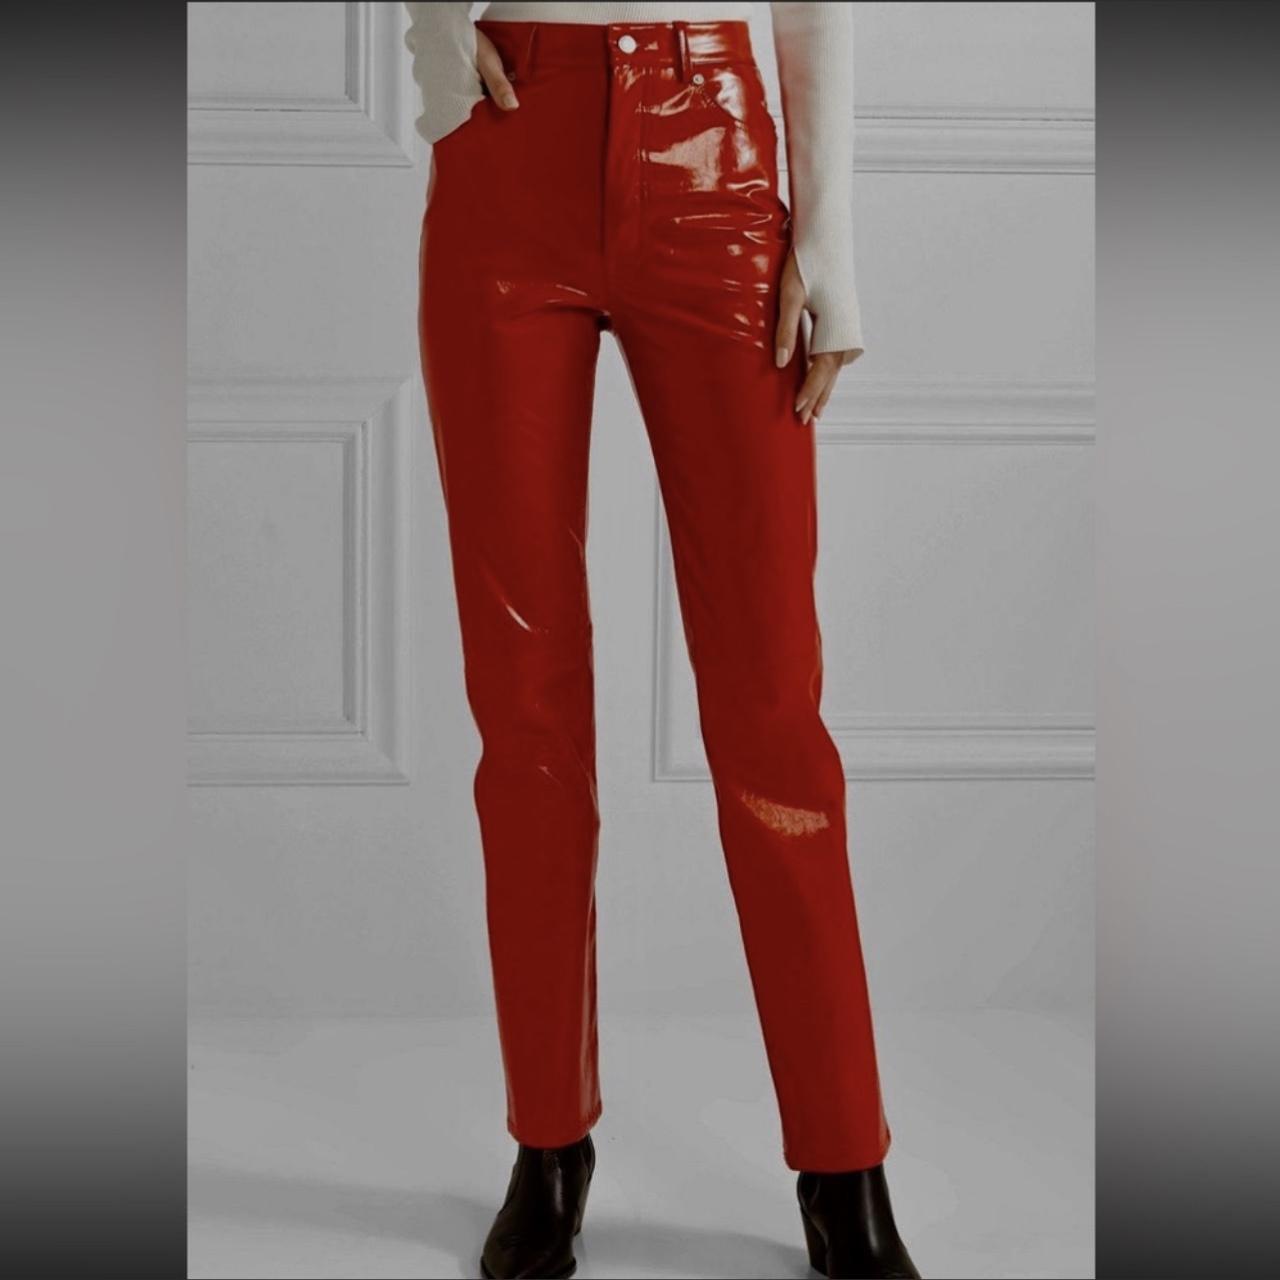 Calzedonia Women's Red Trousers